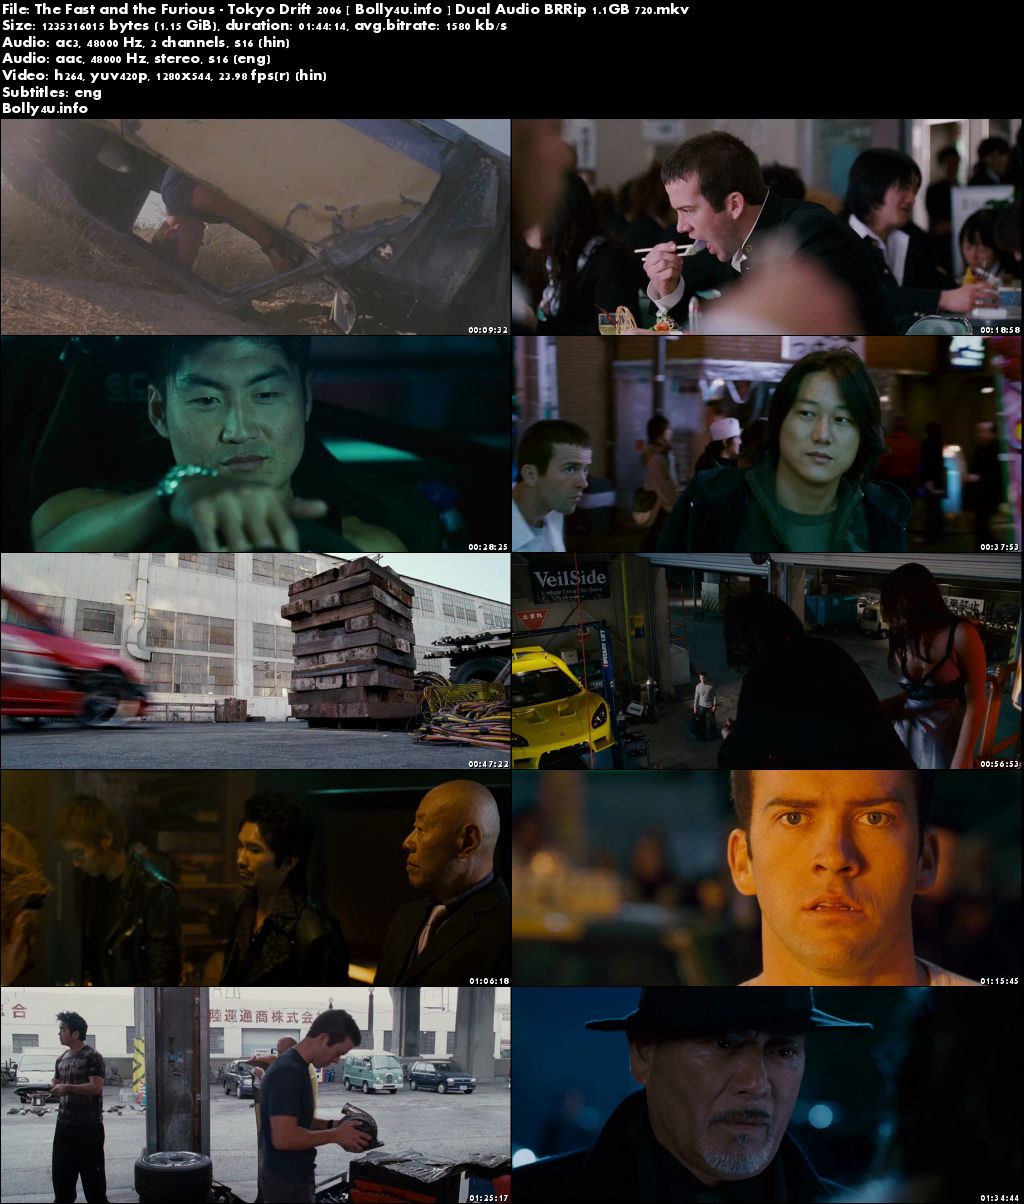 The Fast & the Furious Tokyo Drift 2006 BRRip 350MB Dual Audio 480p Download